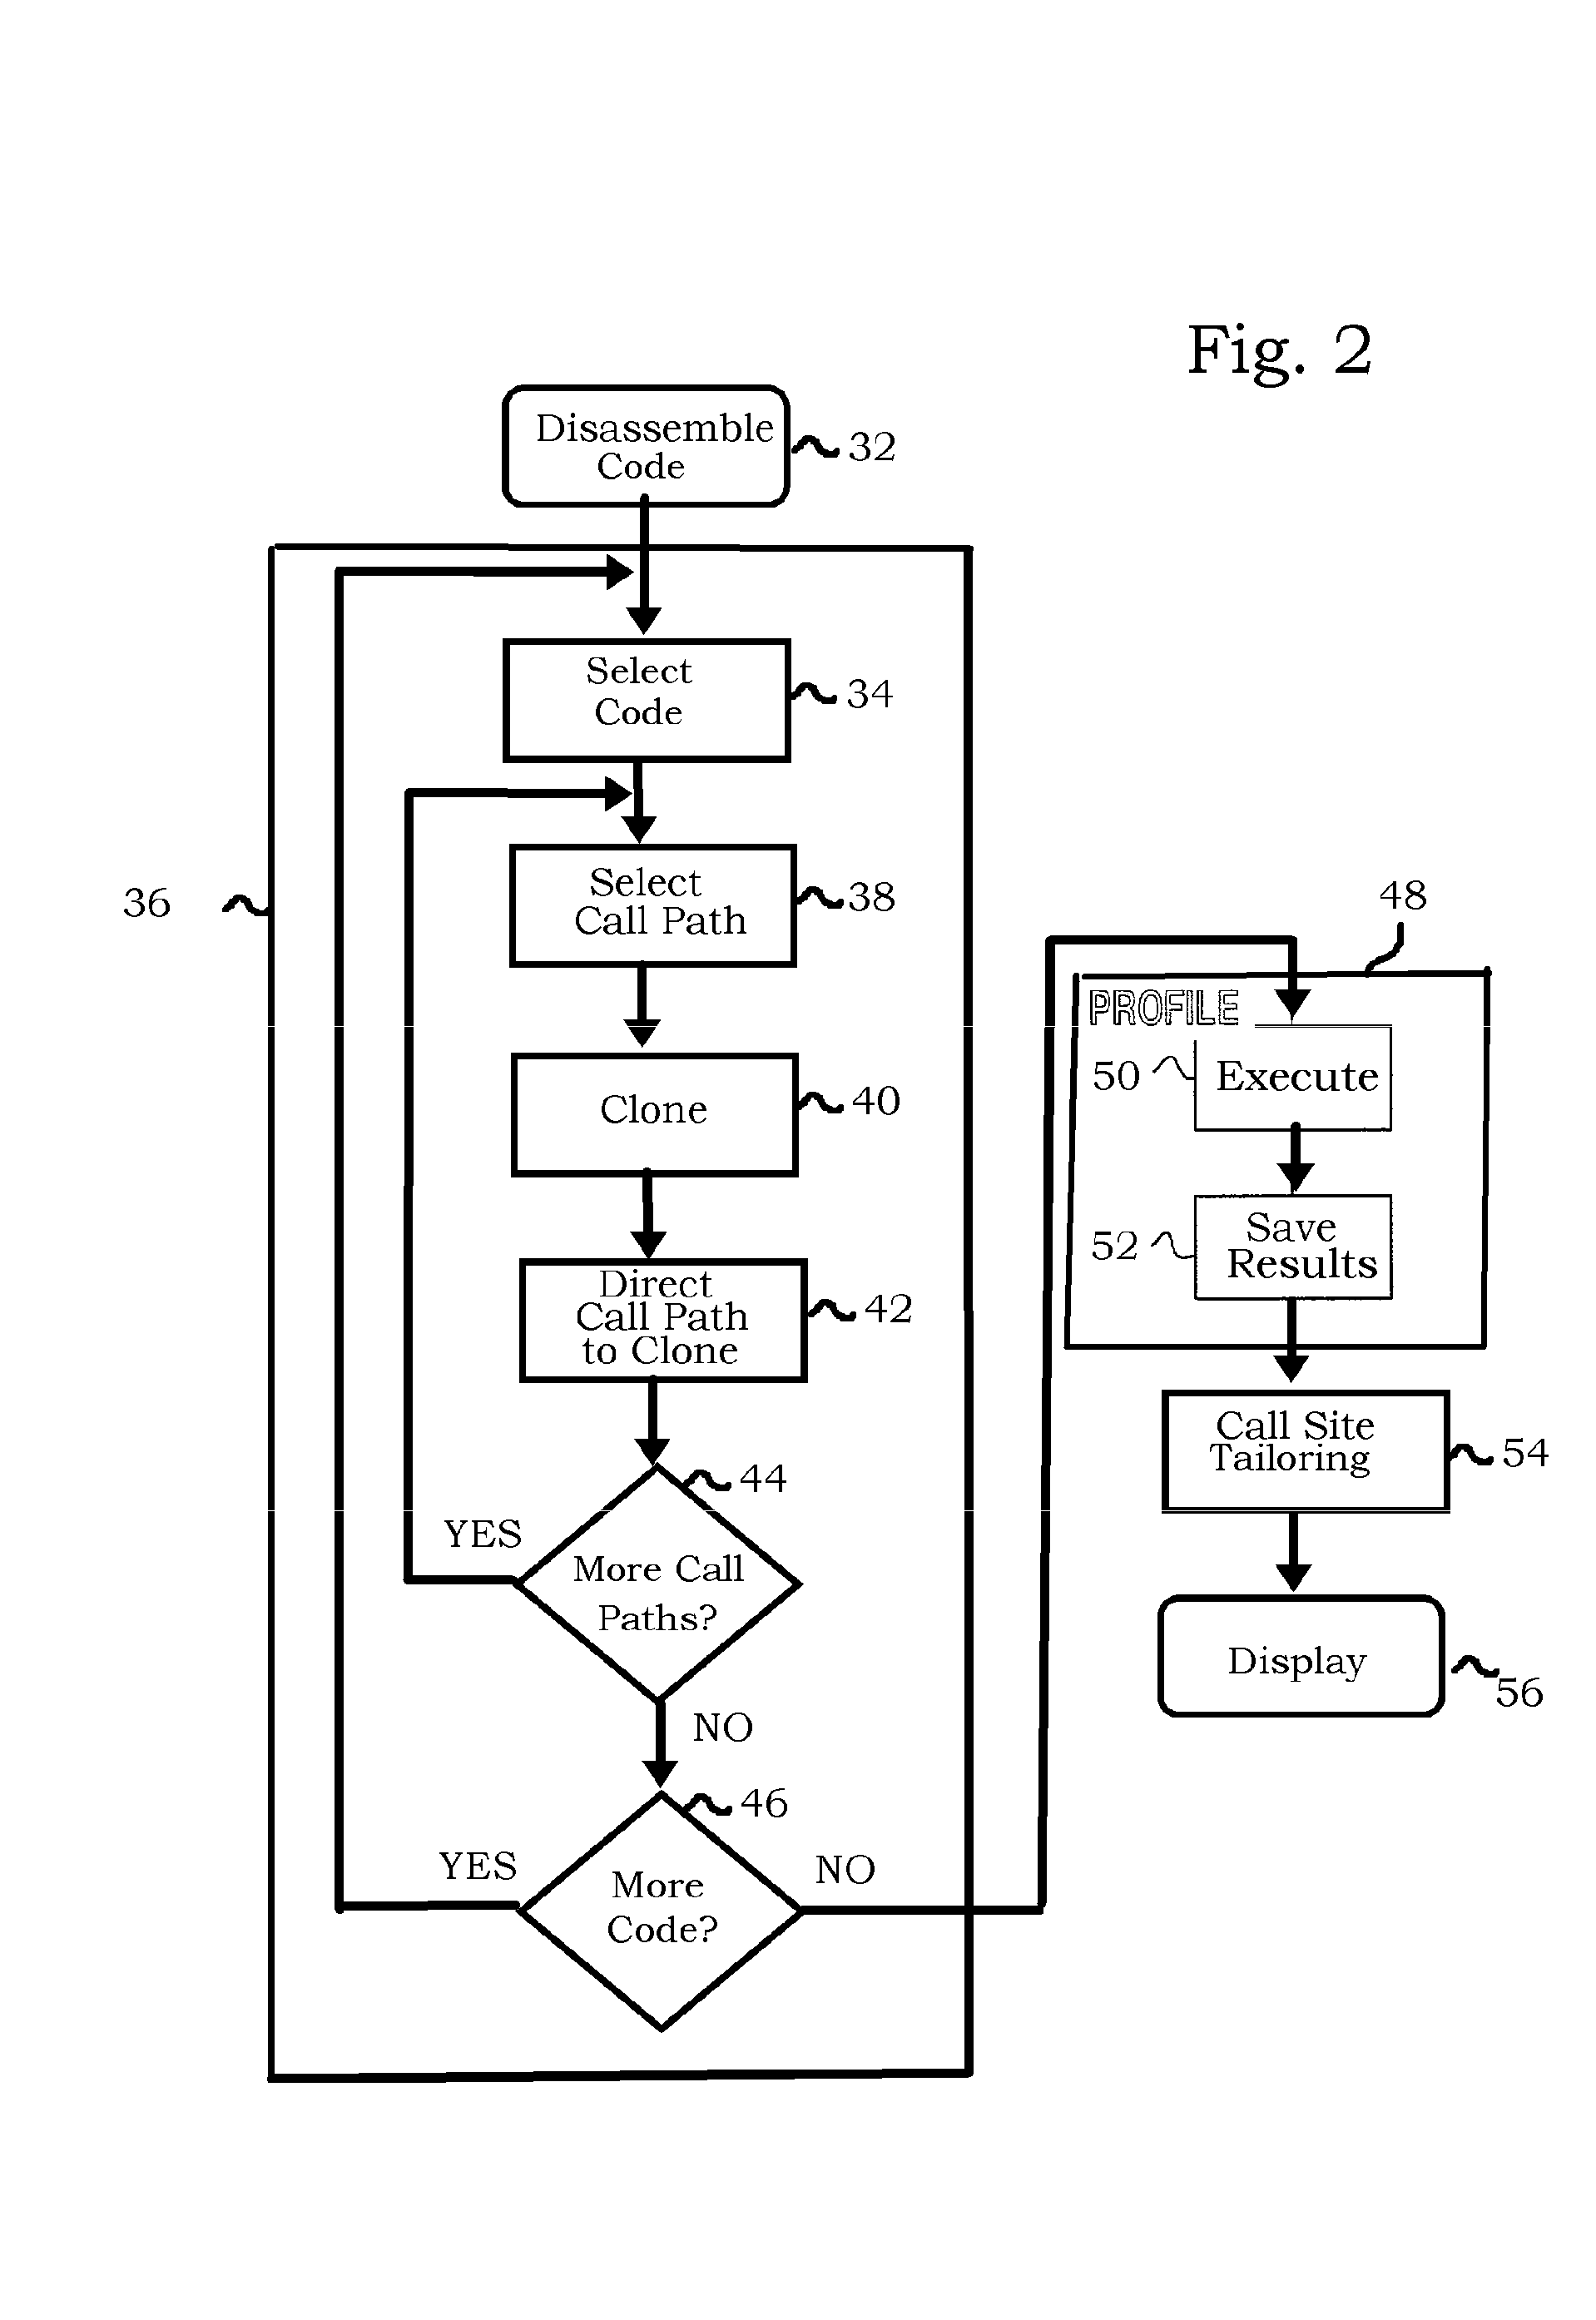 Method for Enabling Profile-Based Call Site Tailor-ing Using Profile Gathering of Cloned Functions